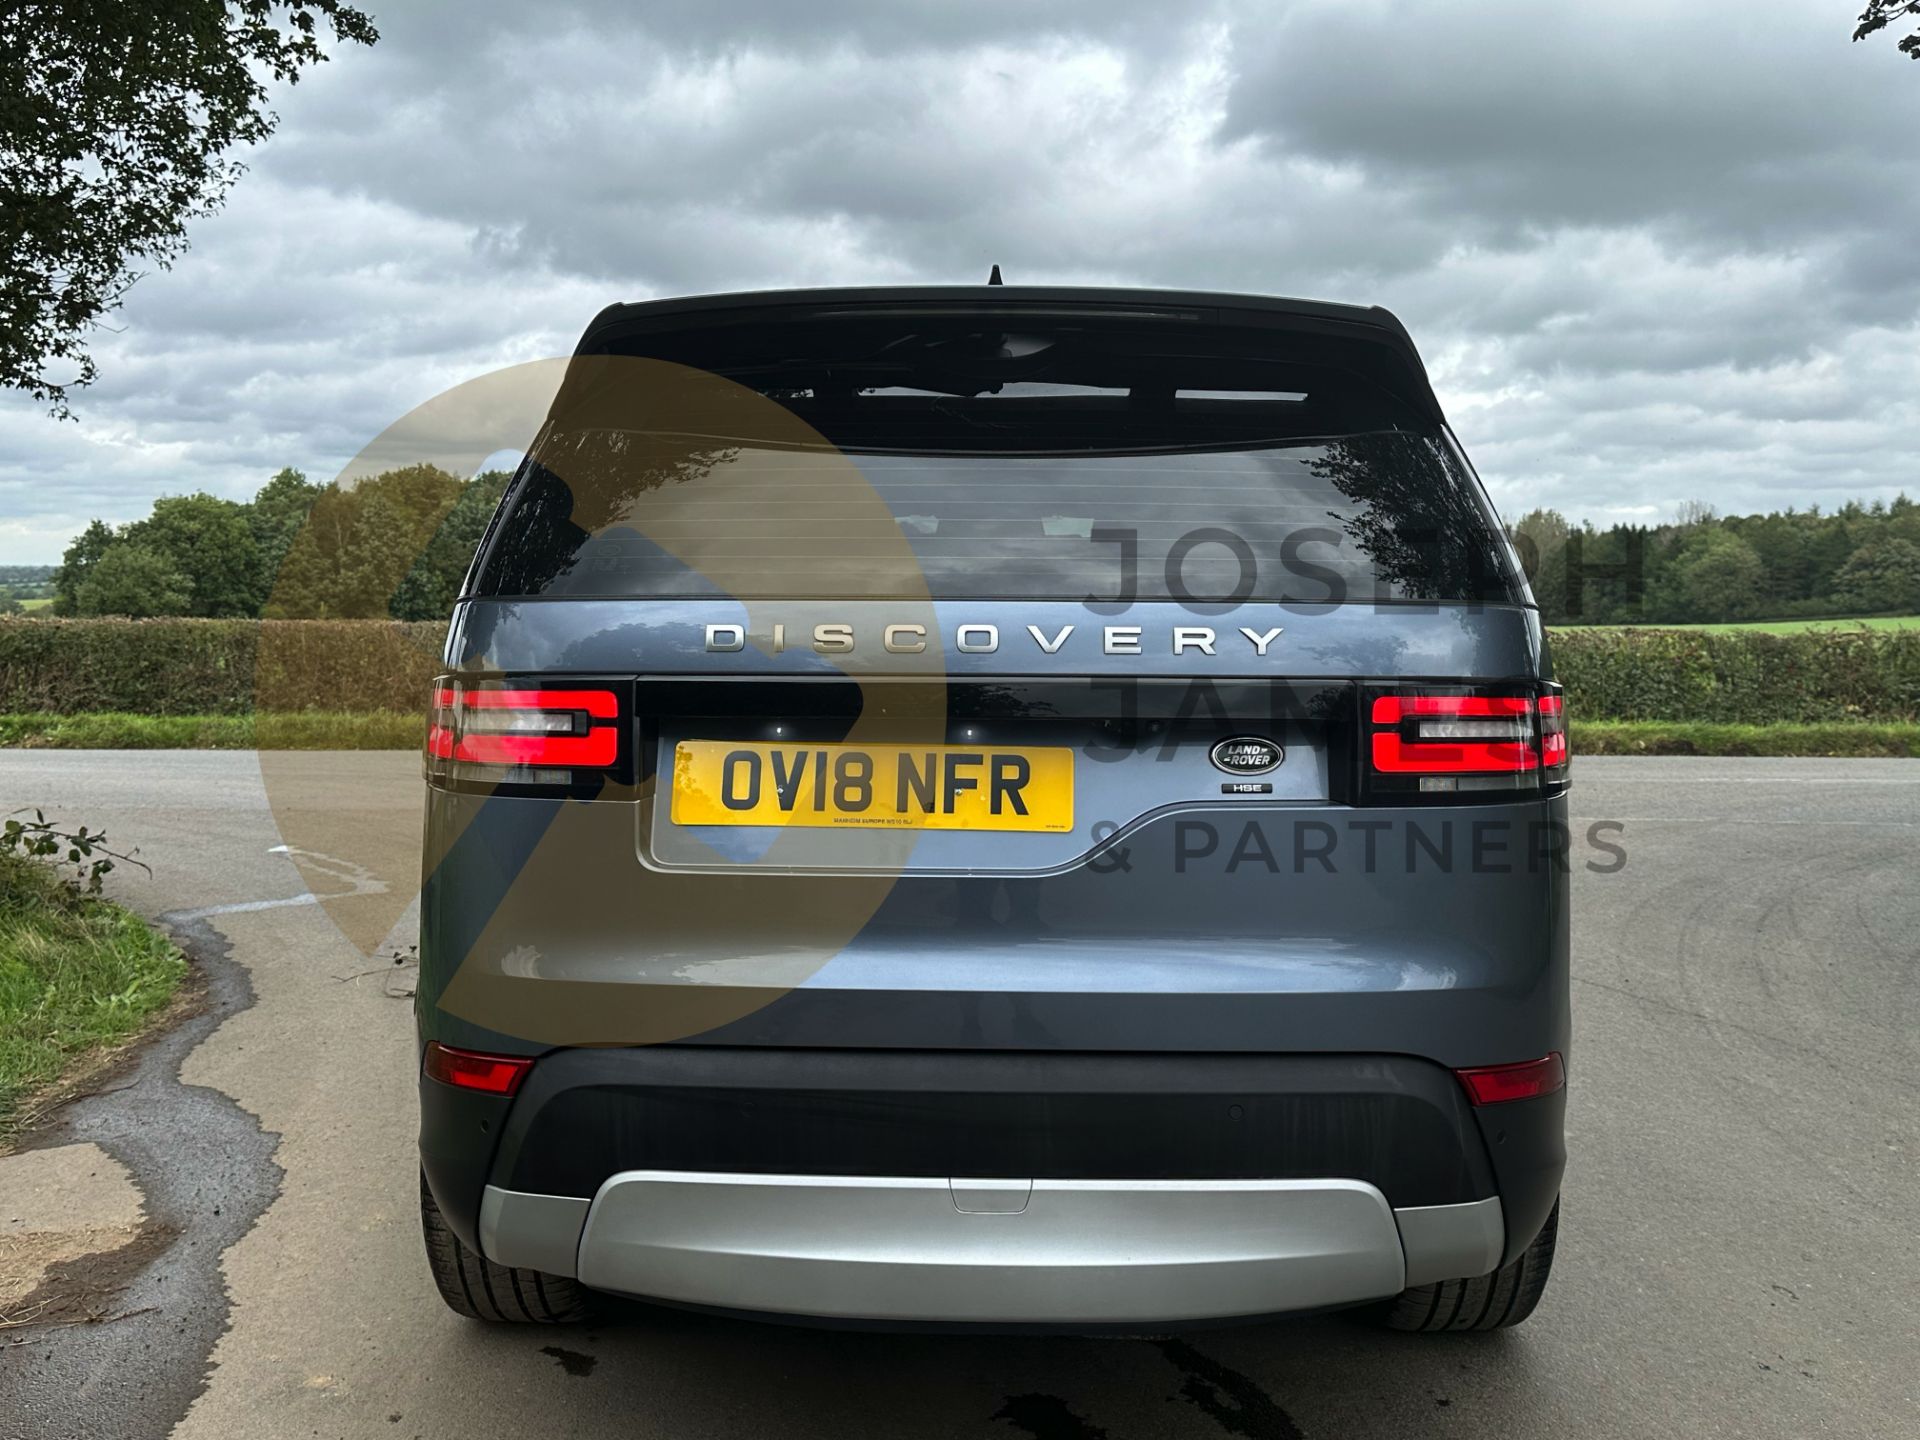 (ON SALE) LAND ROVER DISCOVERY 5 *HSE LUXURY* 7 SEATER SUV (2018 - FACELIFT MODEL) (LOW MILEAGE) - Image 11 of 66